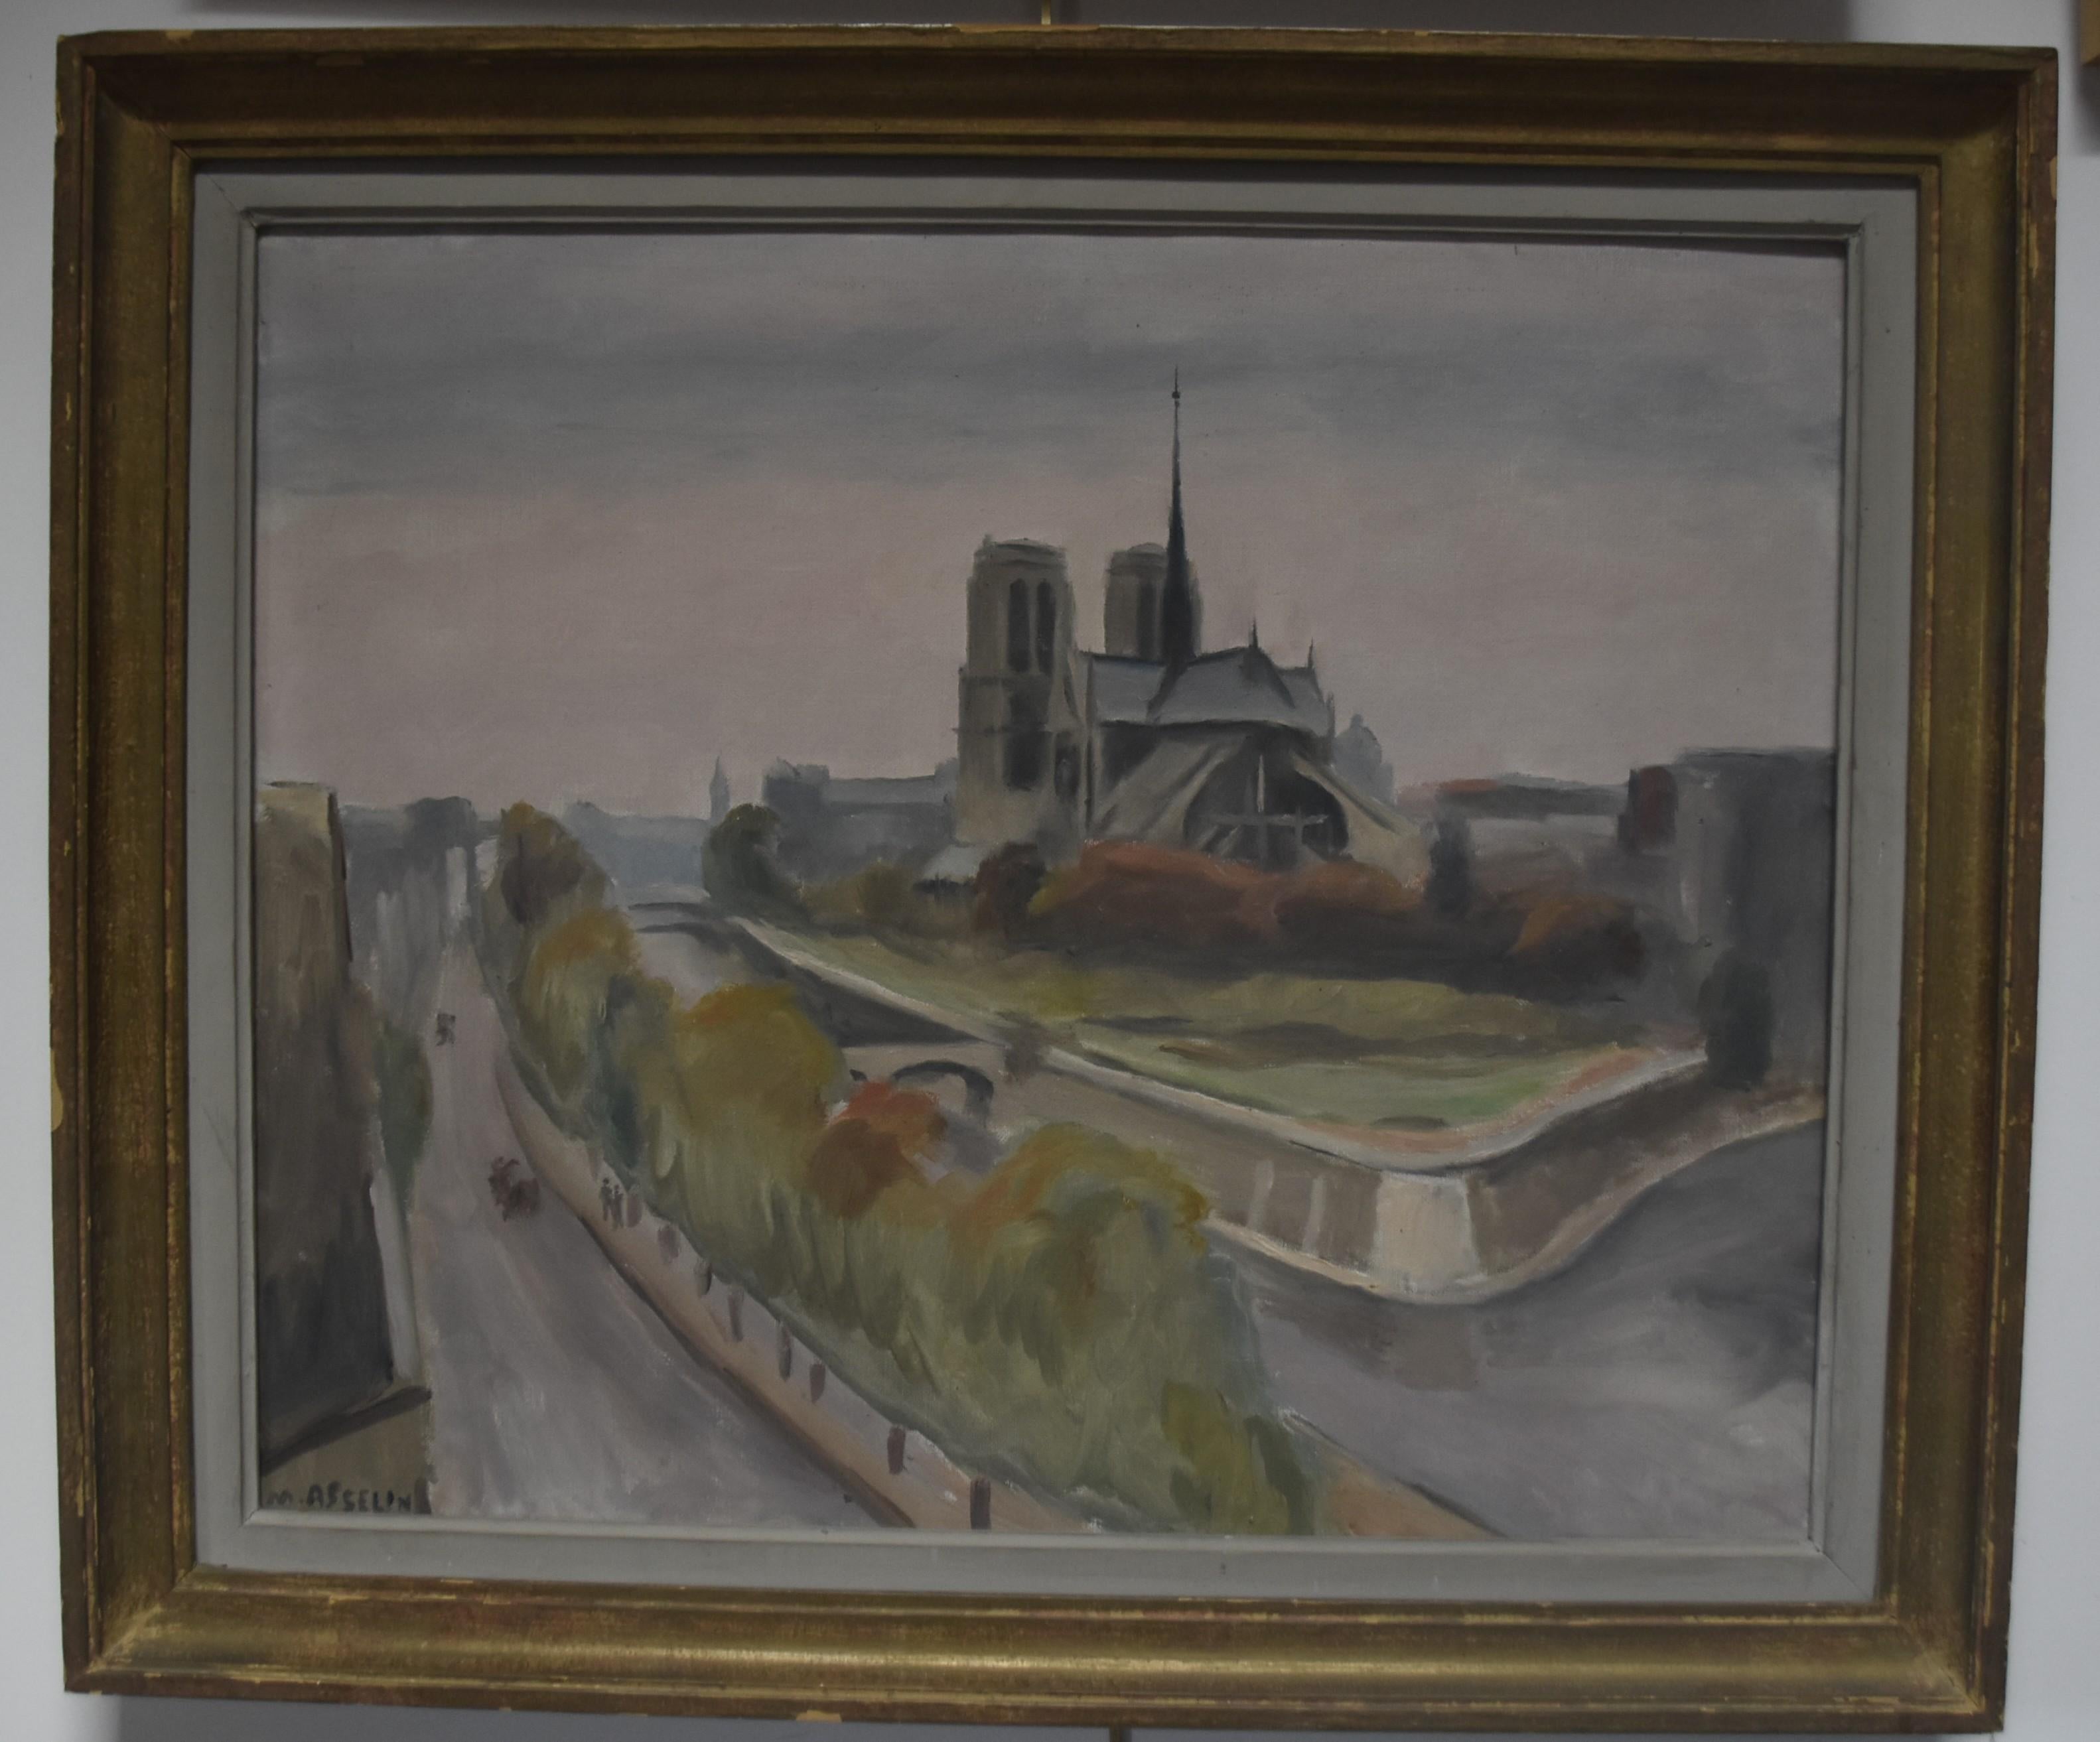 Maurice Asselin (1882-1947) 
Notre-Dame, Paris
Signed lower left,  
Oil on canvas
50 x 61 cm
In good condition 
In its original frame  :  61 x 72 cm

It is really interesting to remember that Maurice Asselin was painting and exhibiting at the same